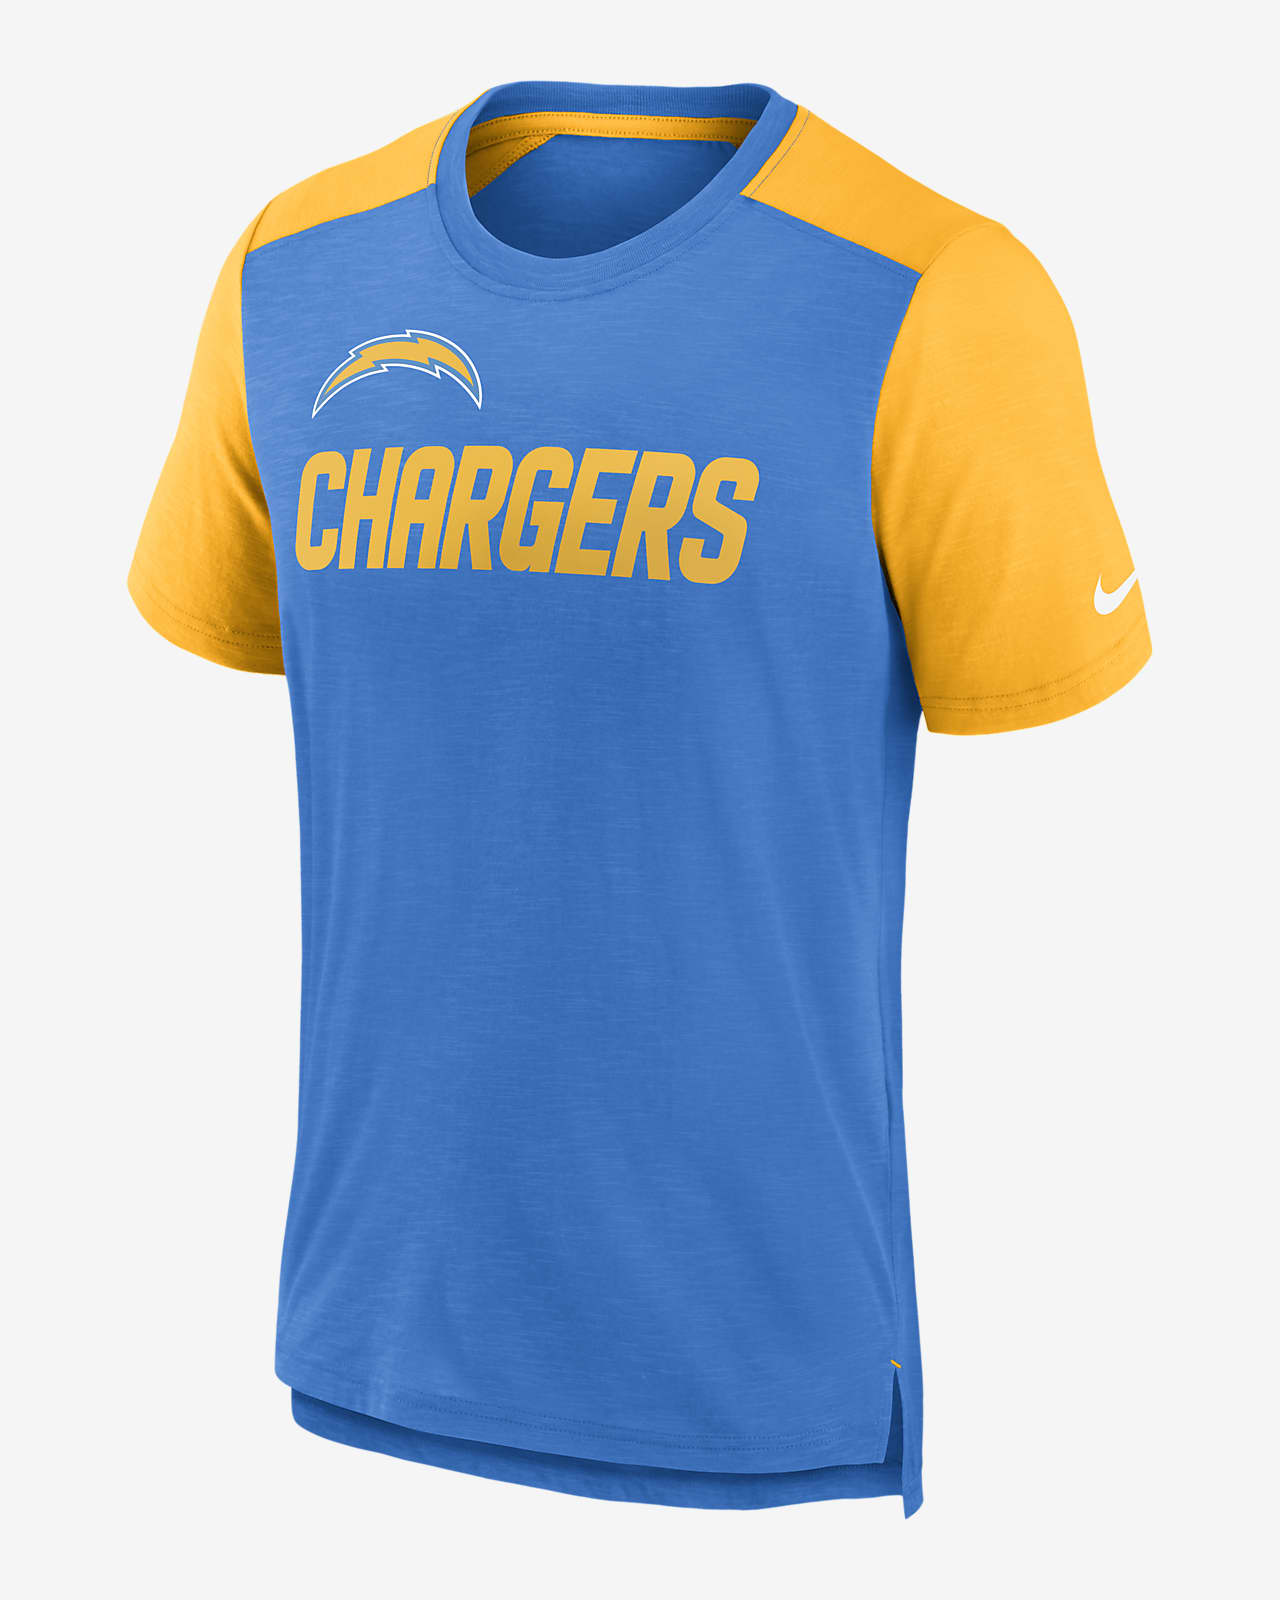 angeles chargers color